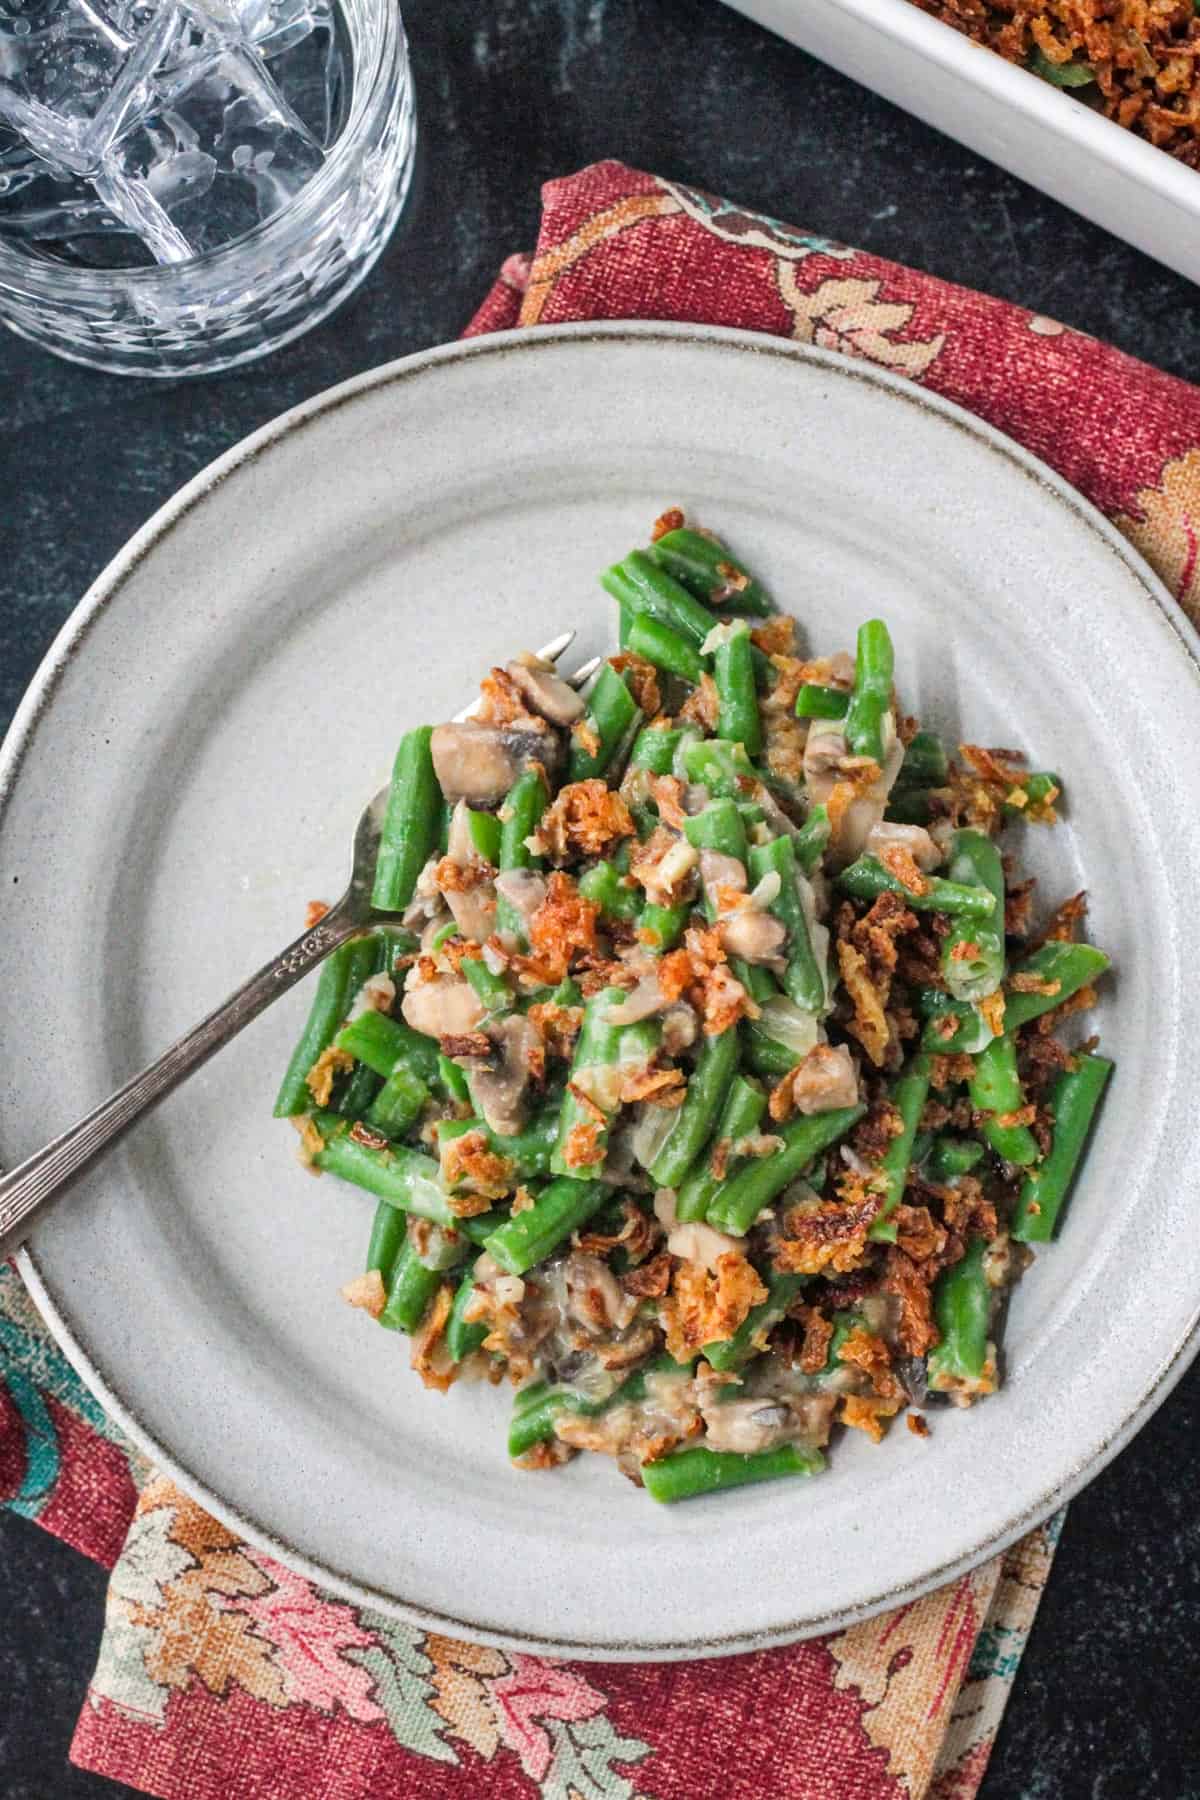 Serving of vegan green bean casserole on a plate with a fork.